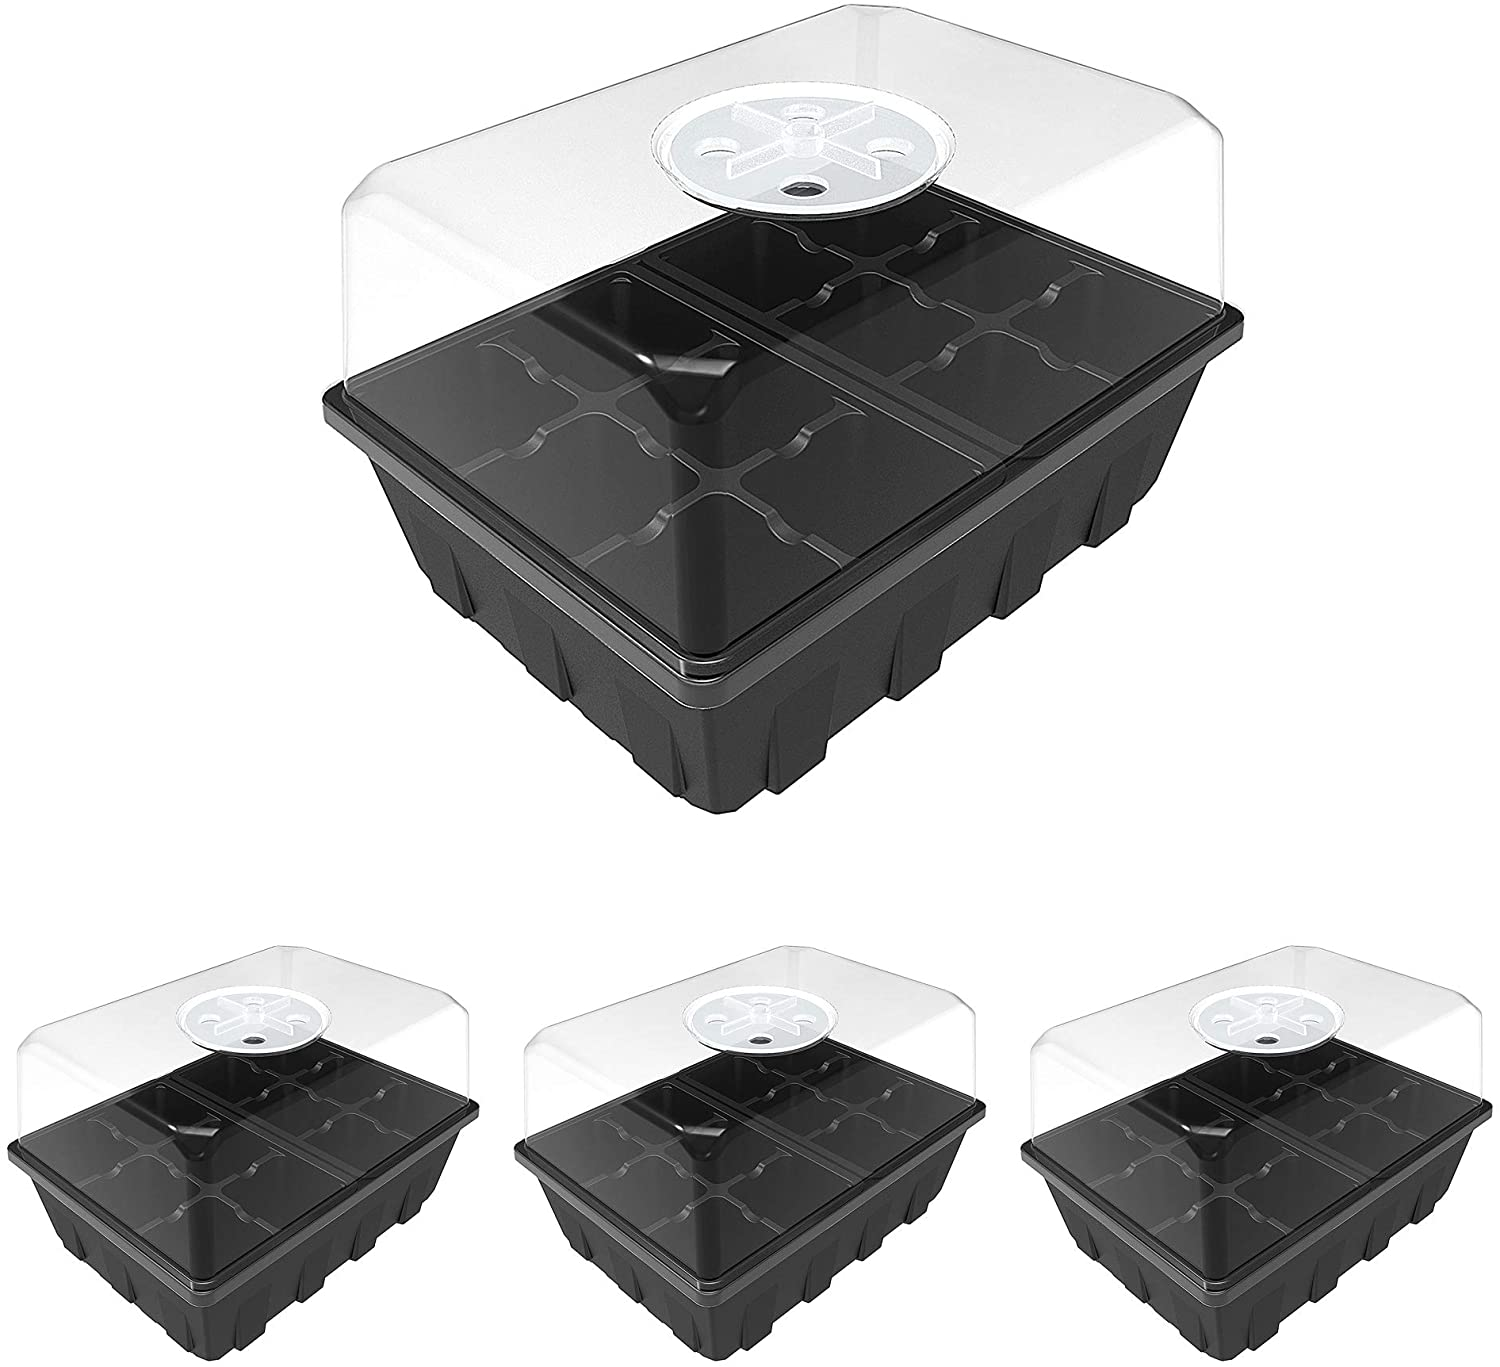 3-Set Garden Propagator Set, Seed Tray Kits with 36-Cell, Seed Starter Tray with Dome and Base 6.6" X 4.5" (12-Cell per Tray)